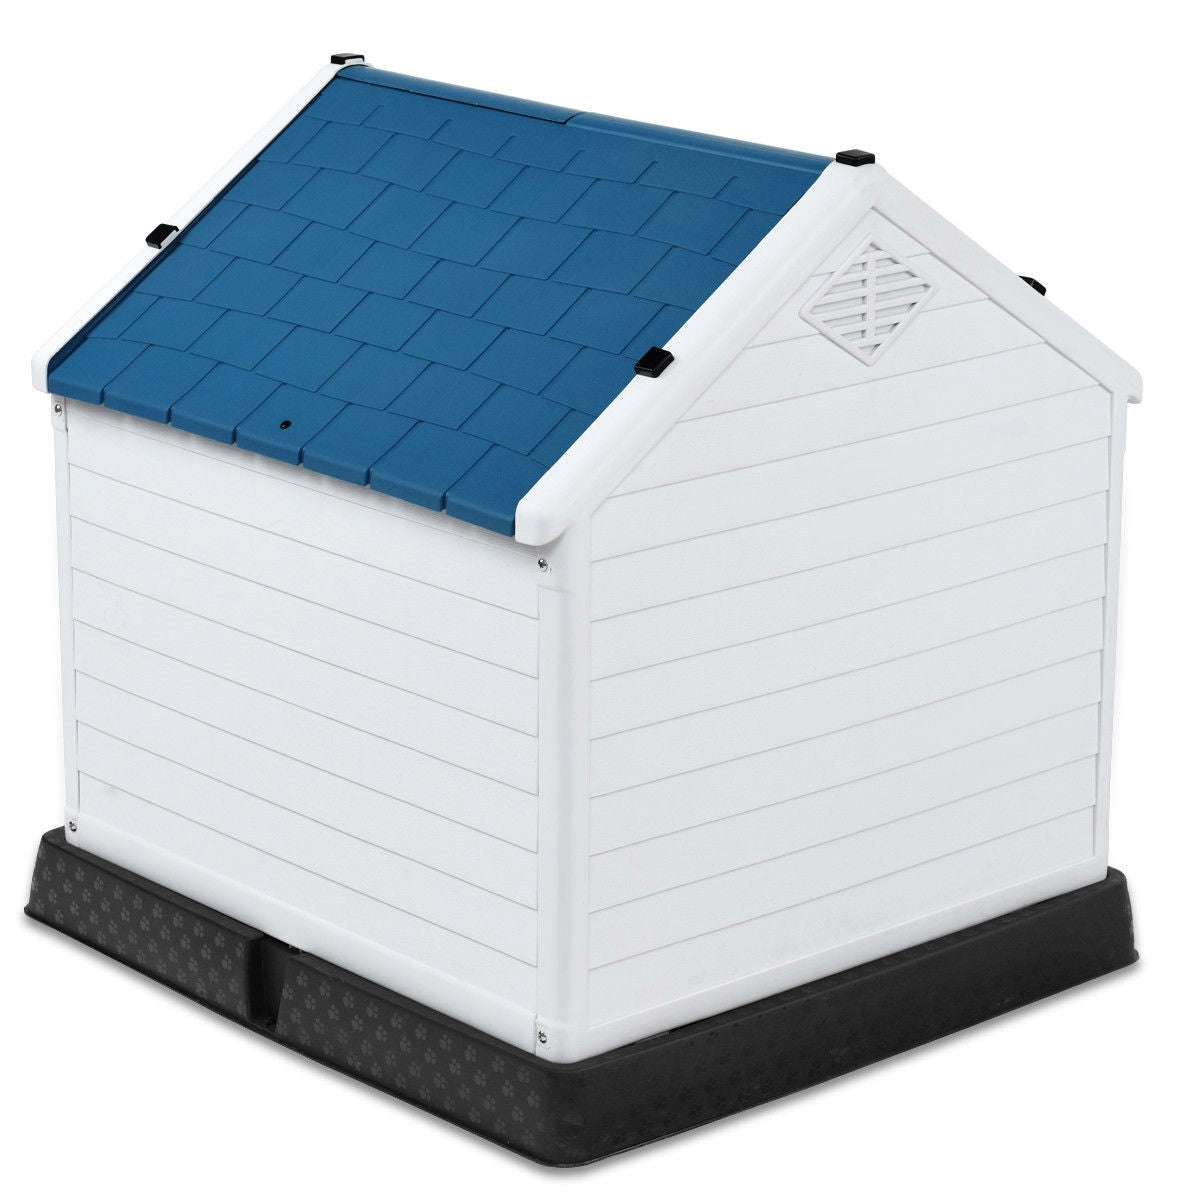 Bedroom > Cat And Dog Beds - Medium Size Dog House Outdoor White Blue Plastic With Elevated Floor